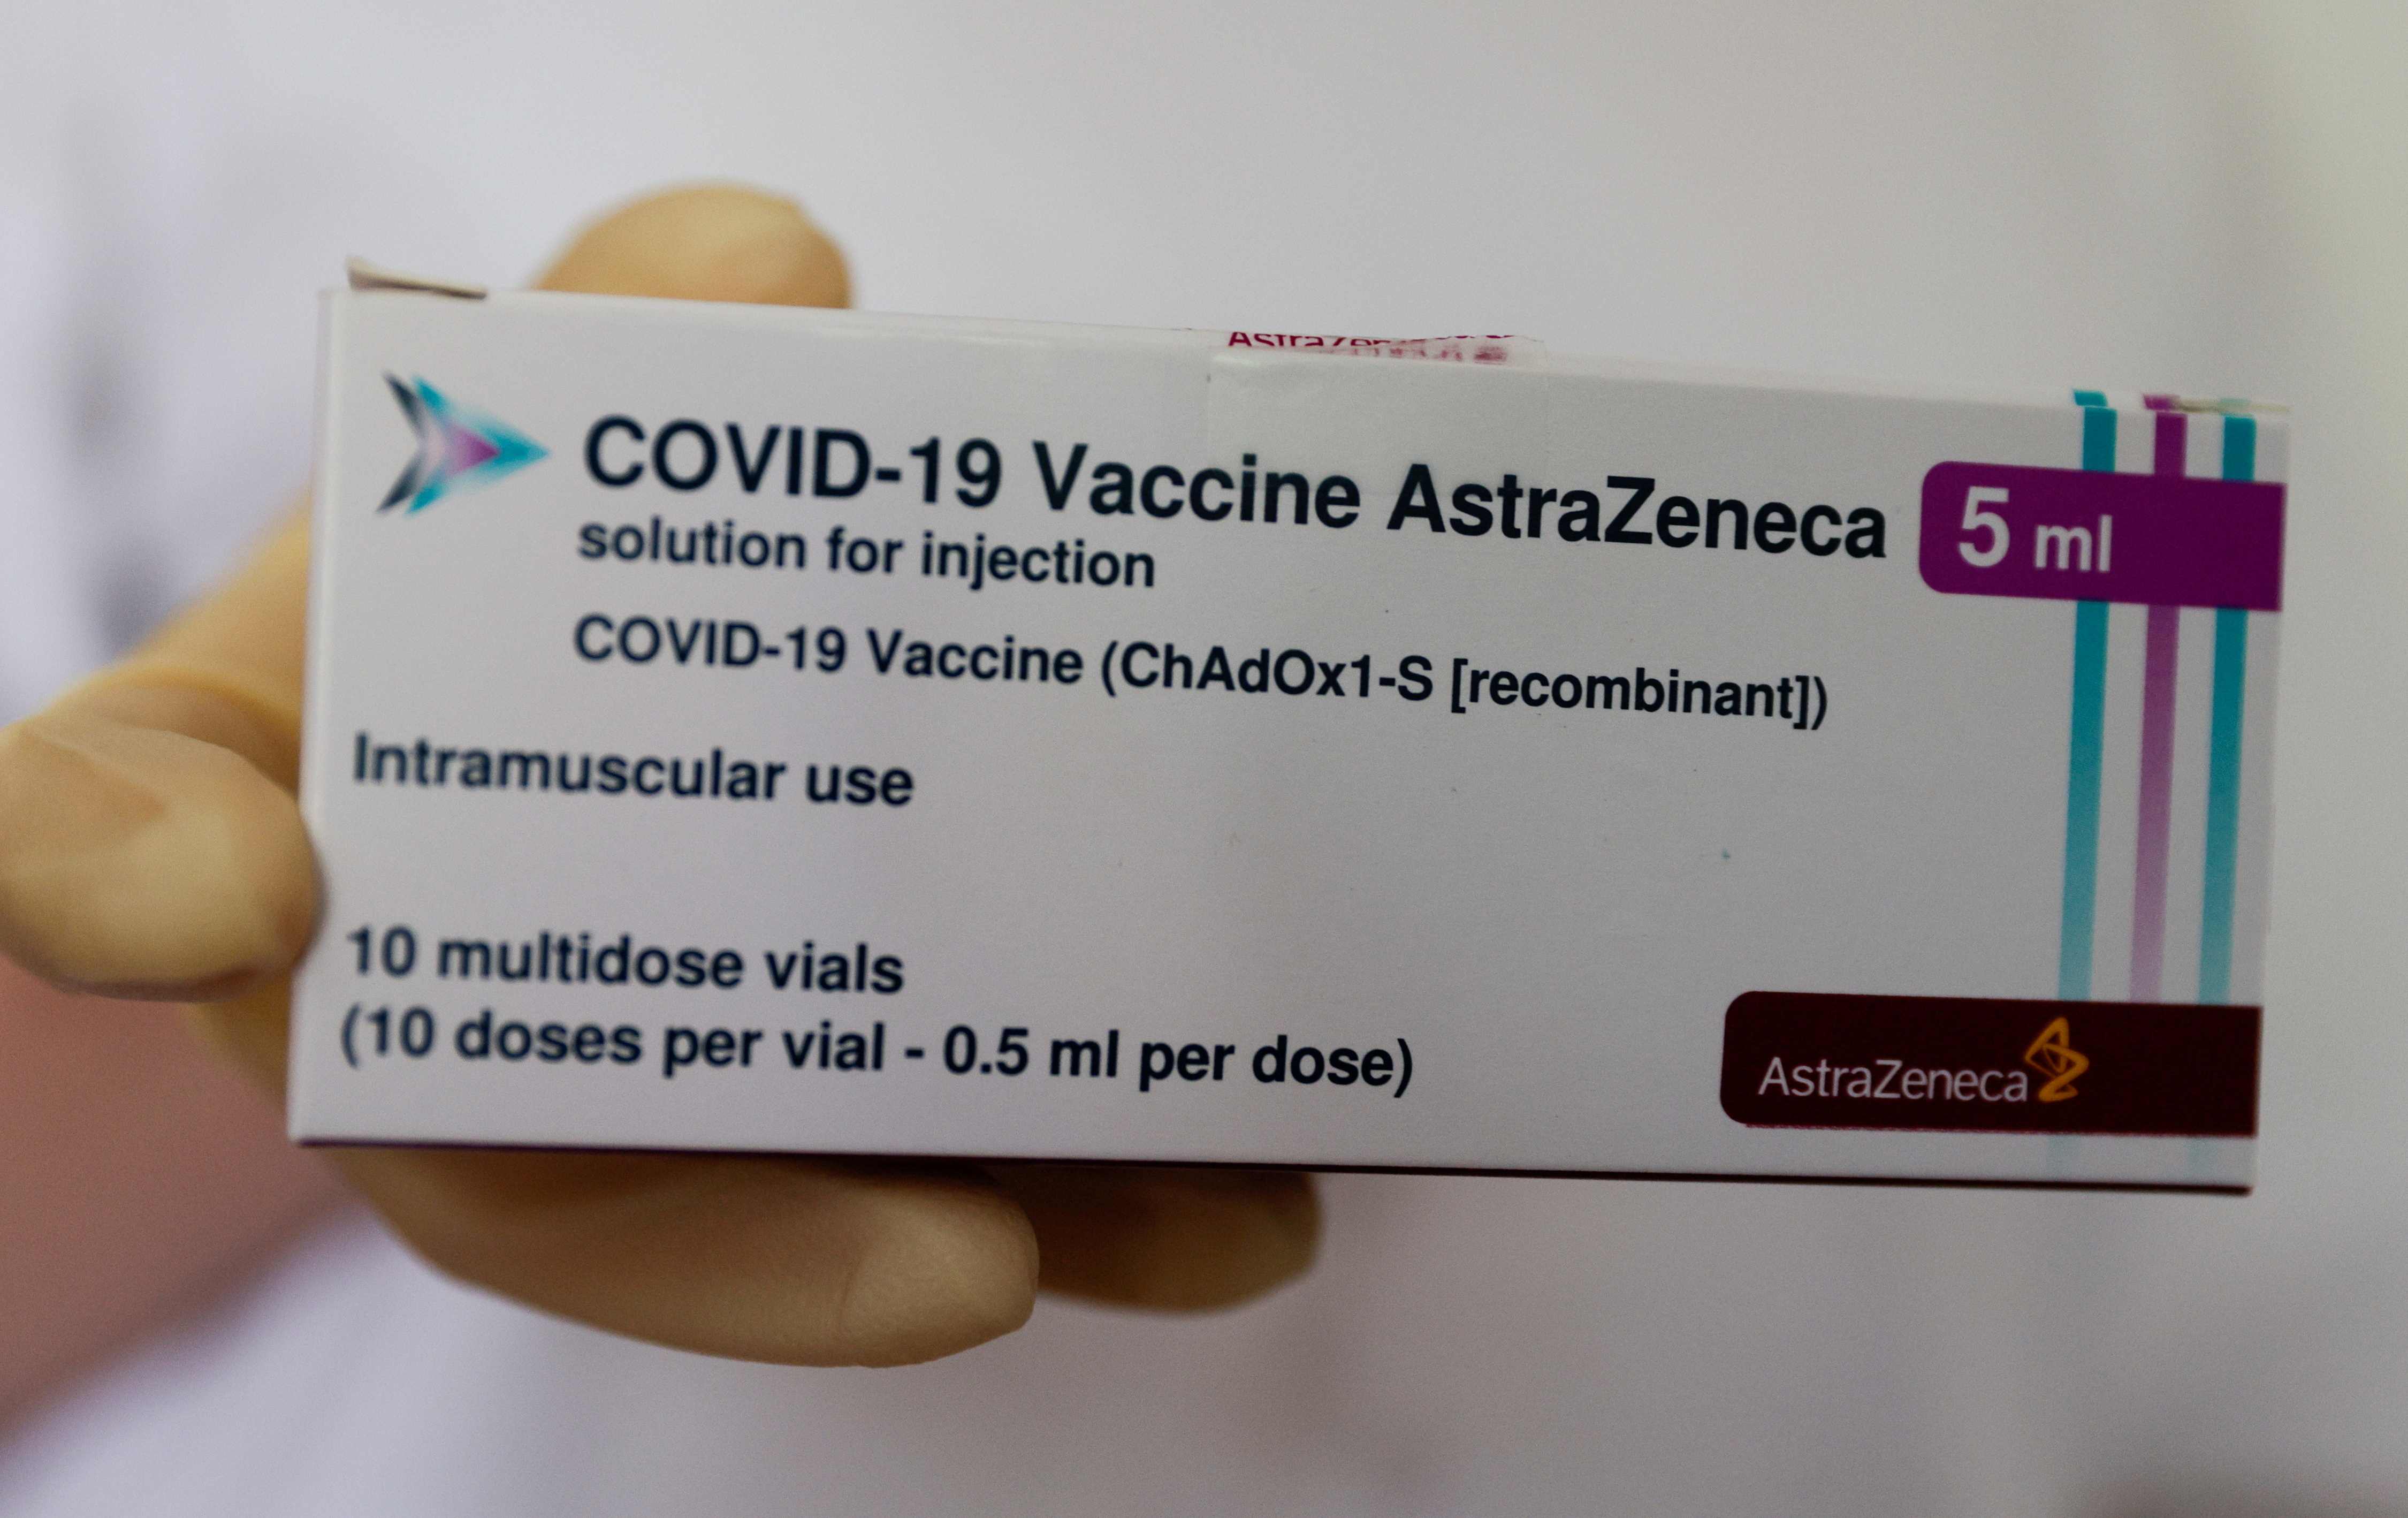 A box of AstraZeneca's COVID-19 vaccine is seen in a general practice facility, as the spread of the coronavirus disease (COVID-19) continues, in Vienna, Austria May 18, 2021. REUTERS/Leonhard Foeger/File Photo